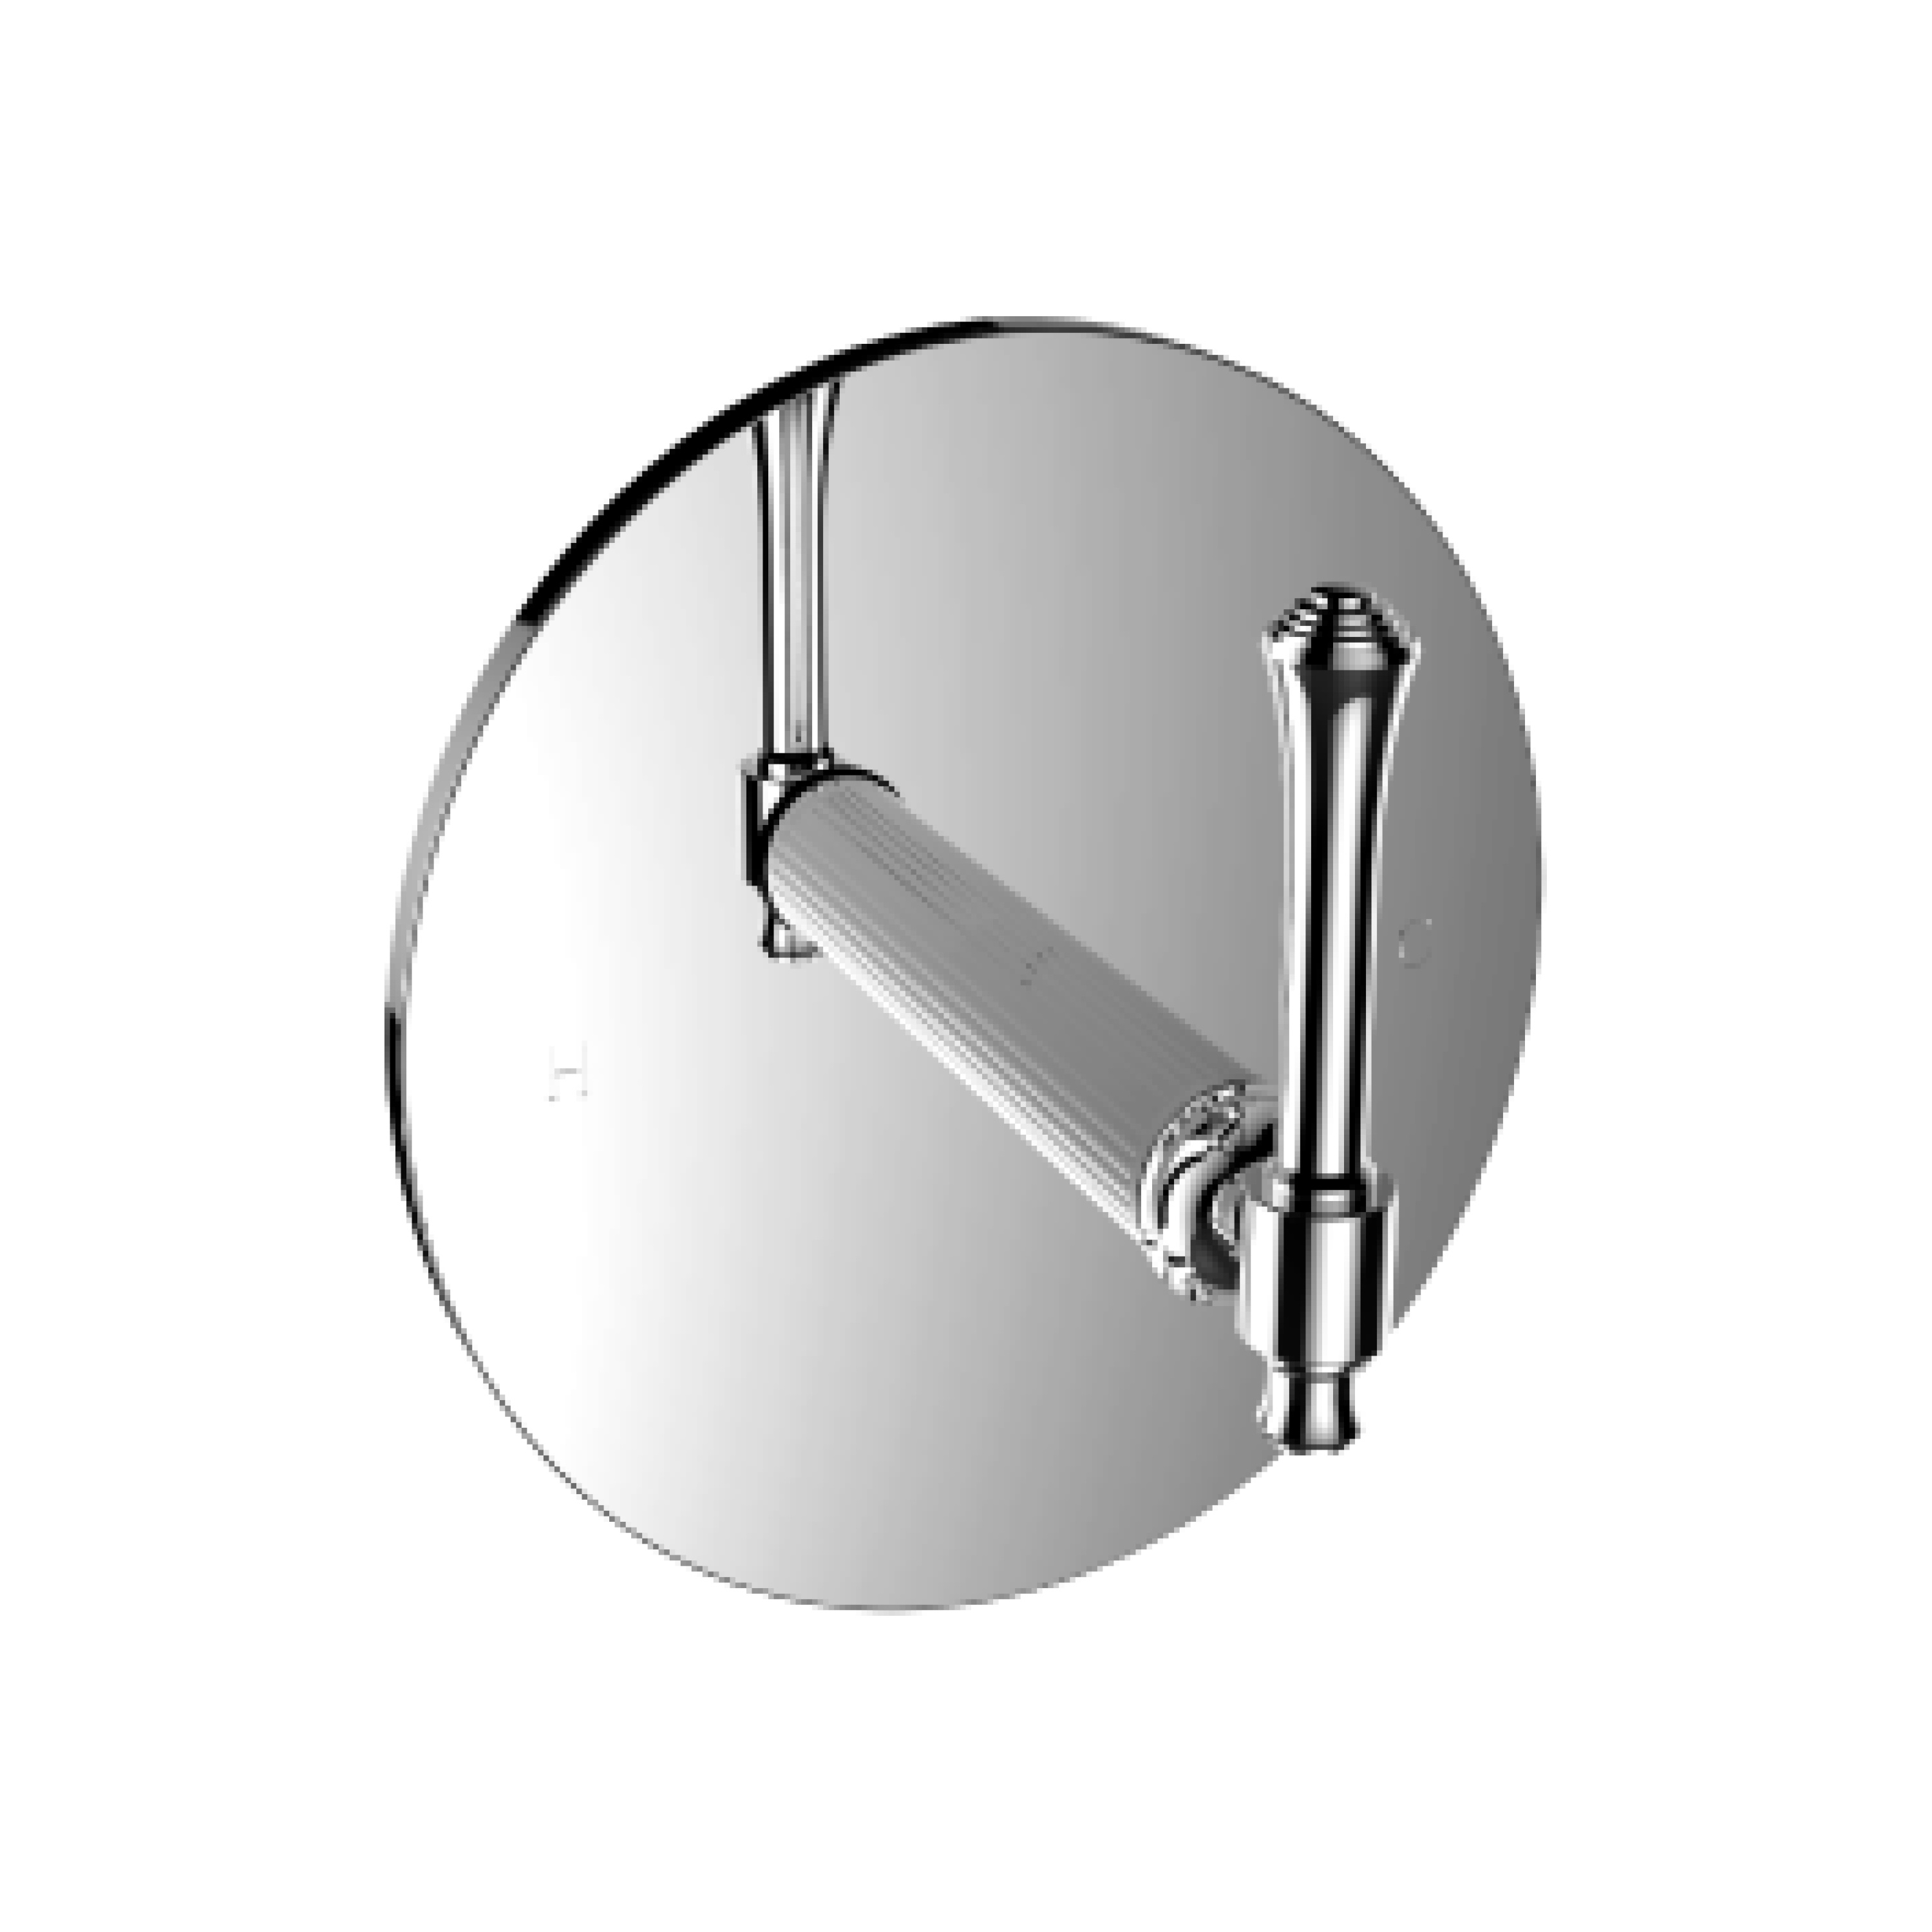 Santec 3431AT10-TM Athena II Pressure Balance Shower - Trim only with AT Handle - Polished Chrome